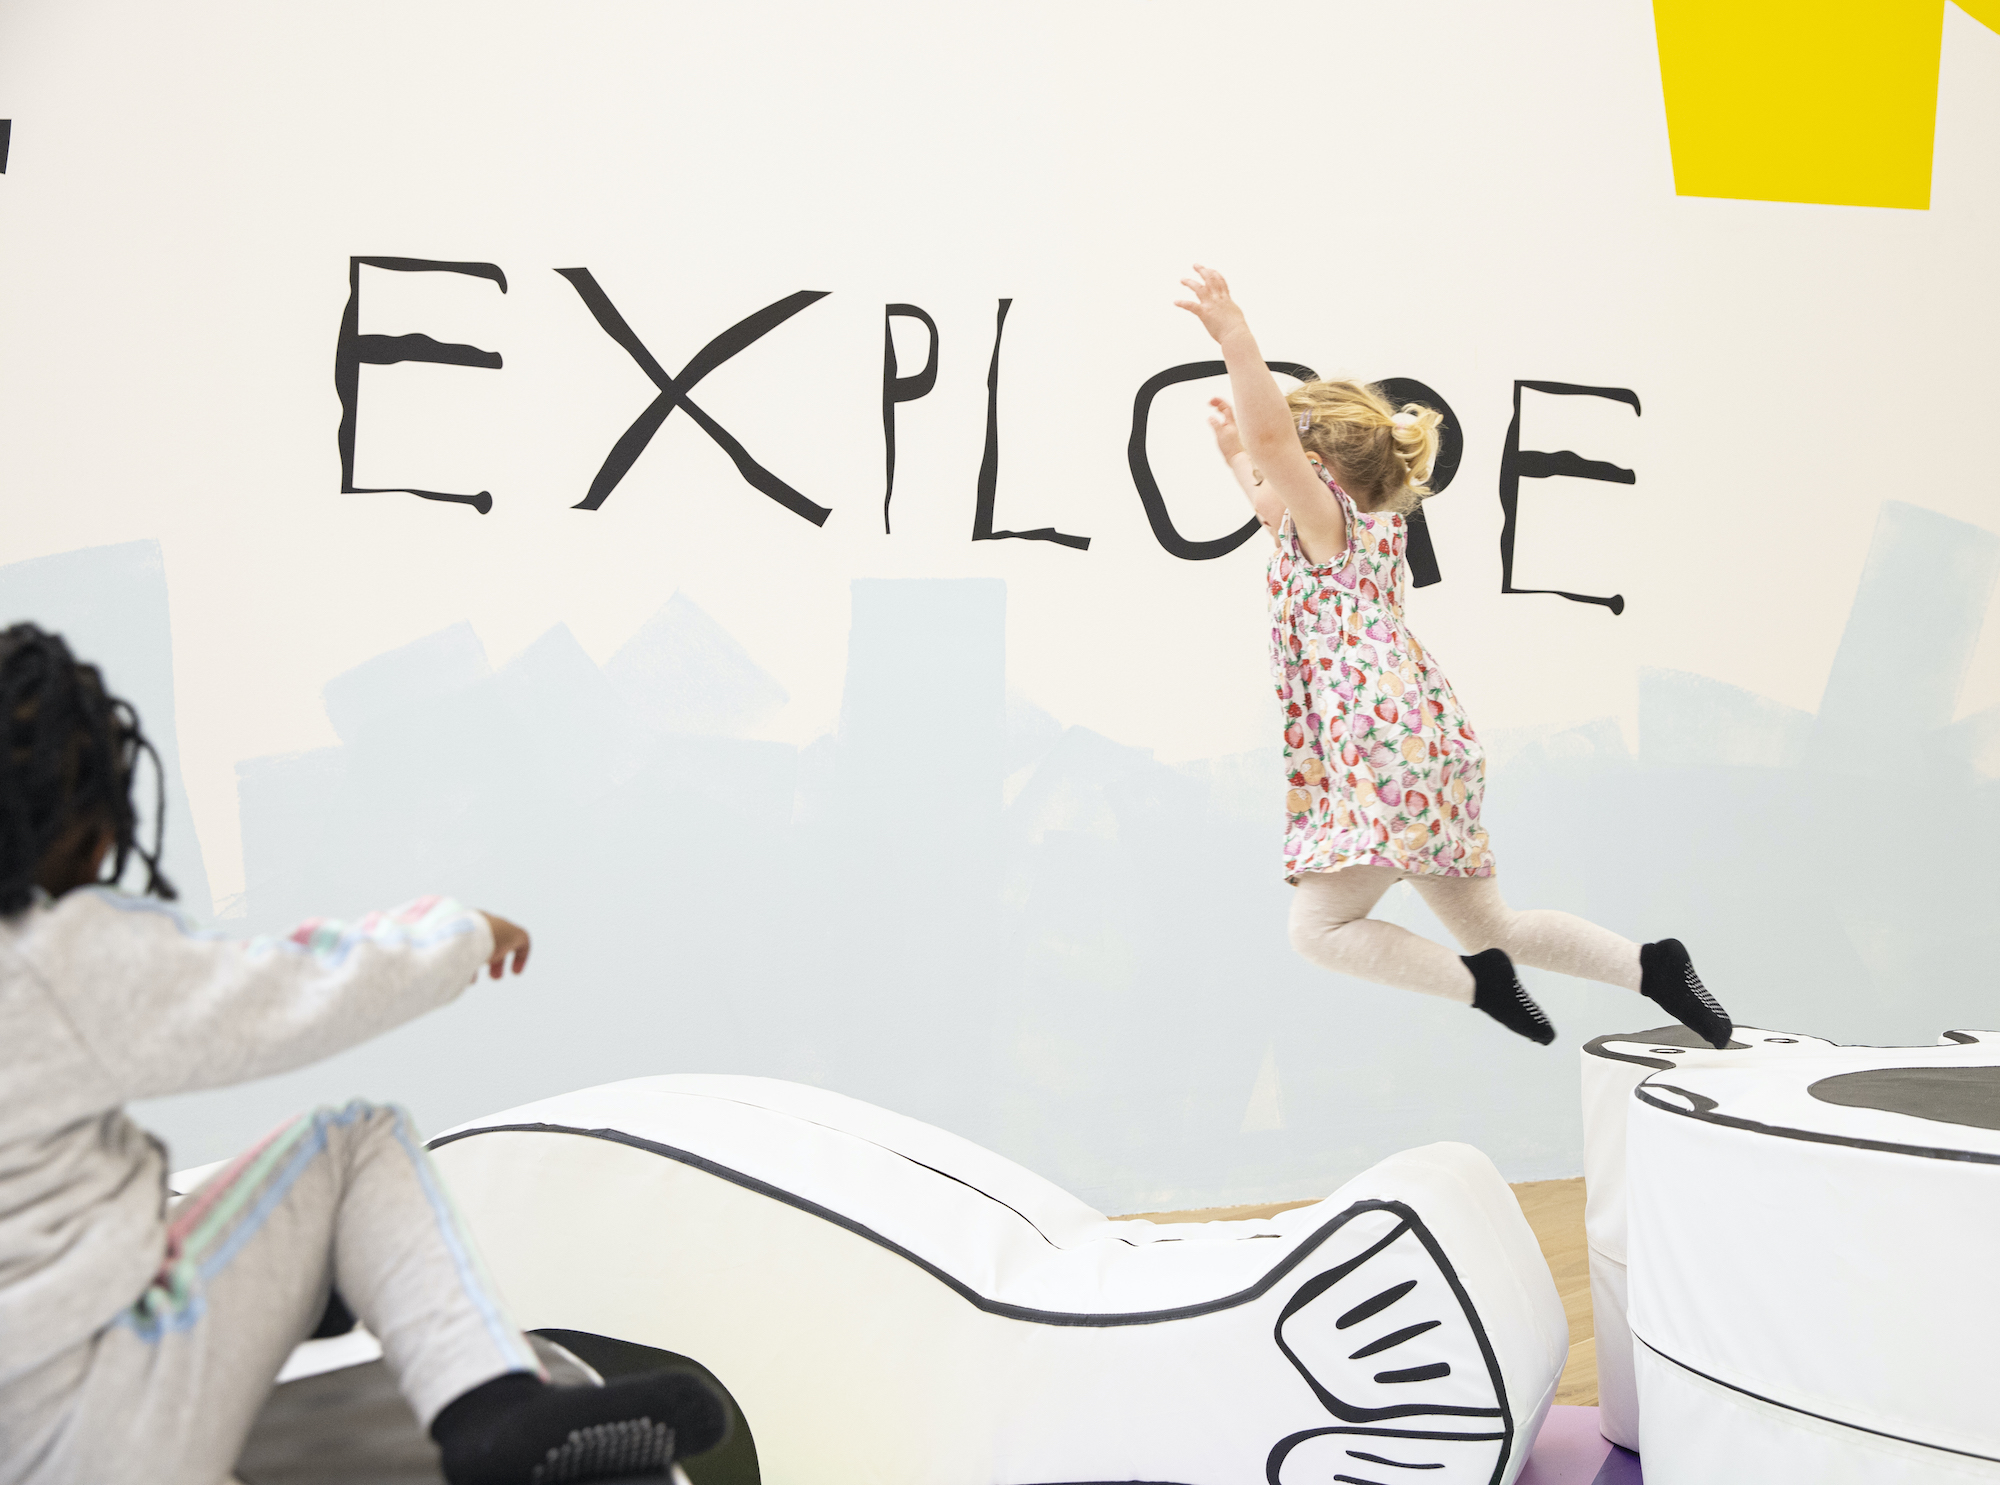 A young child leaps, with the word 'Explore' painted in the background